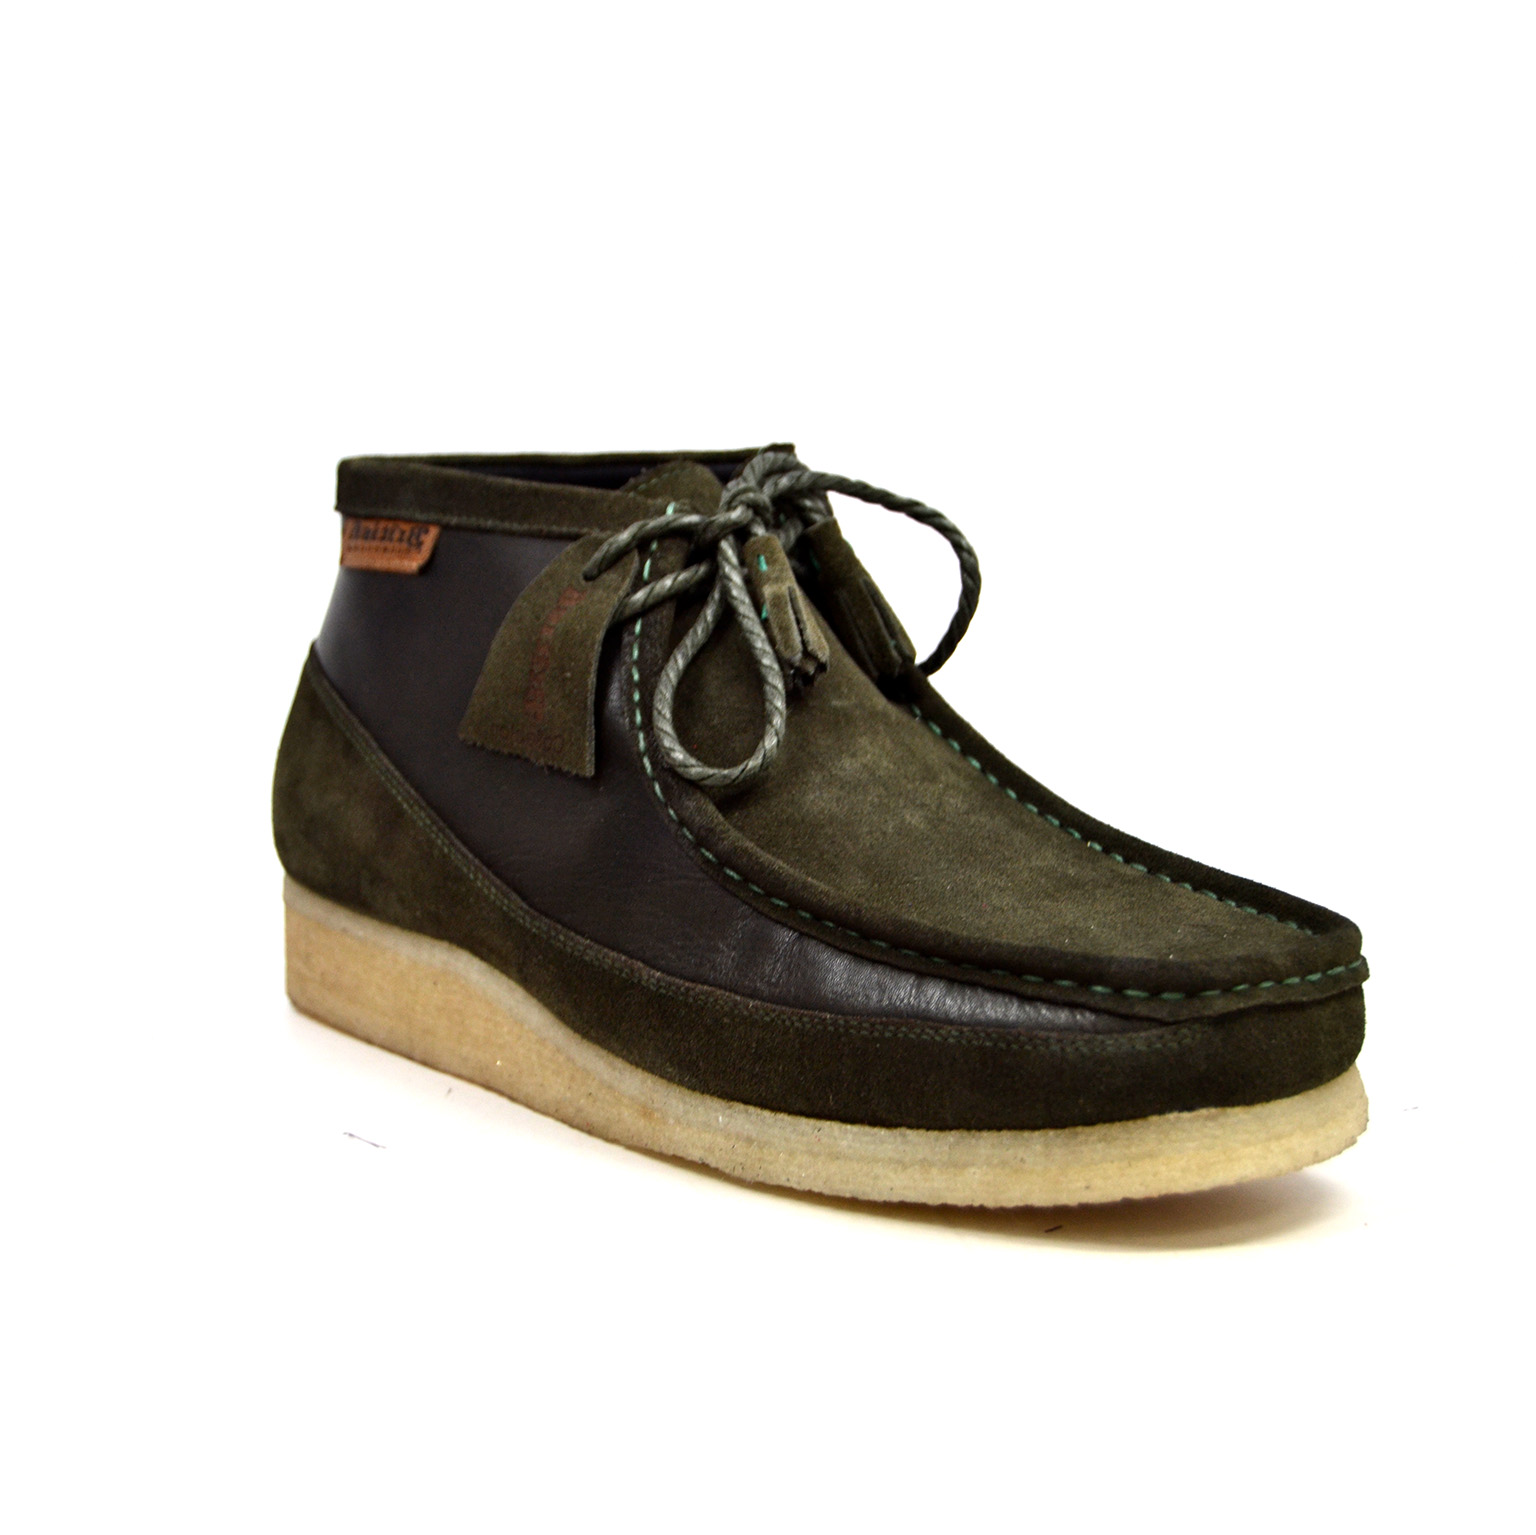 British Collection Walkers-Green Leather and Suede [100100-03] - $170. ...